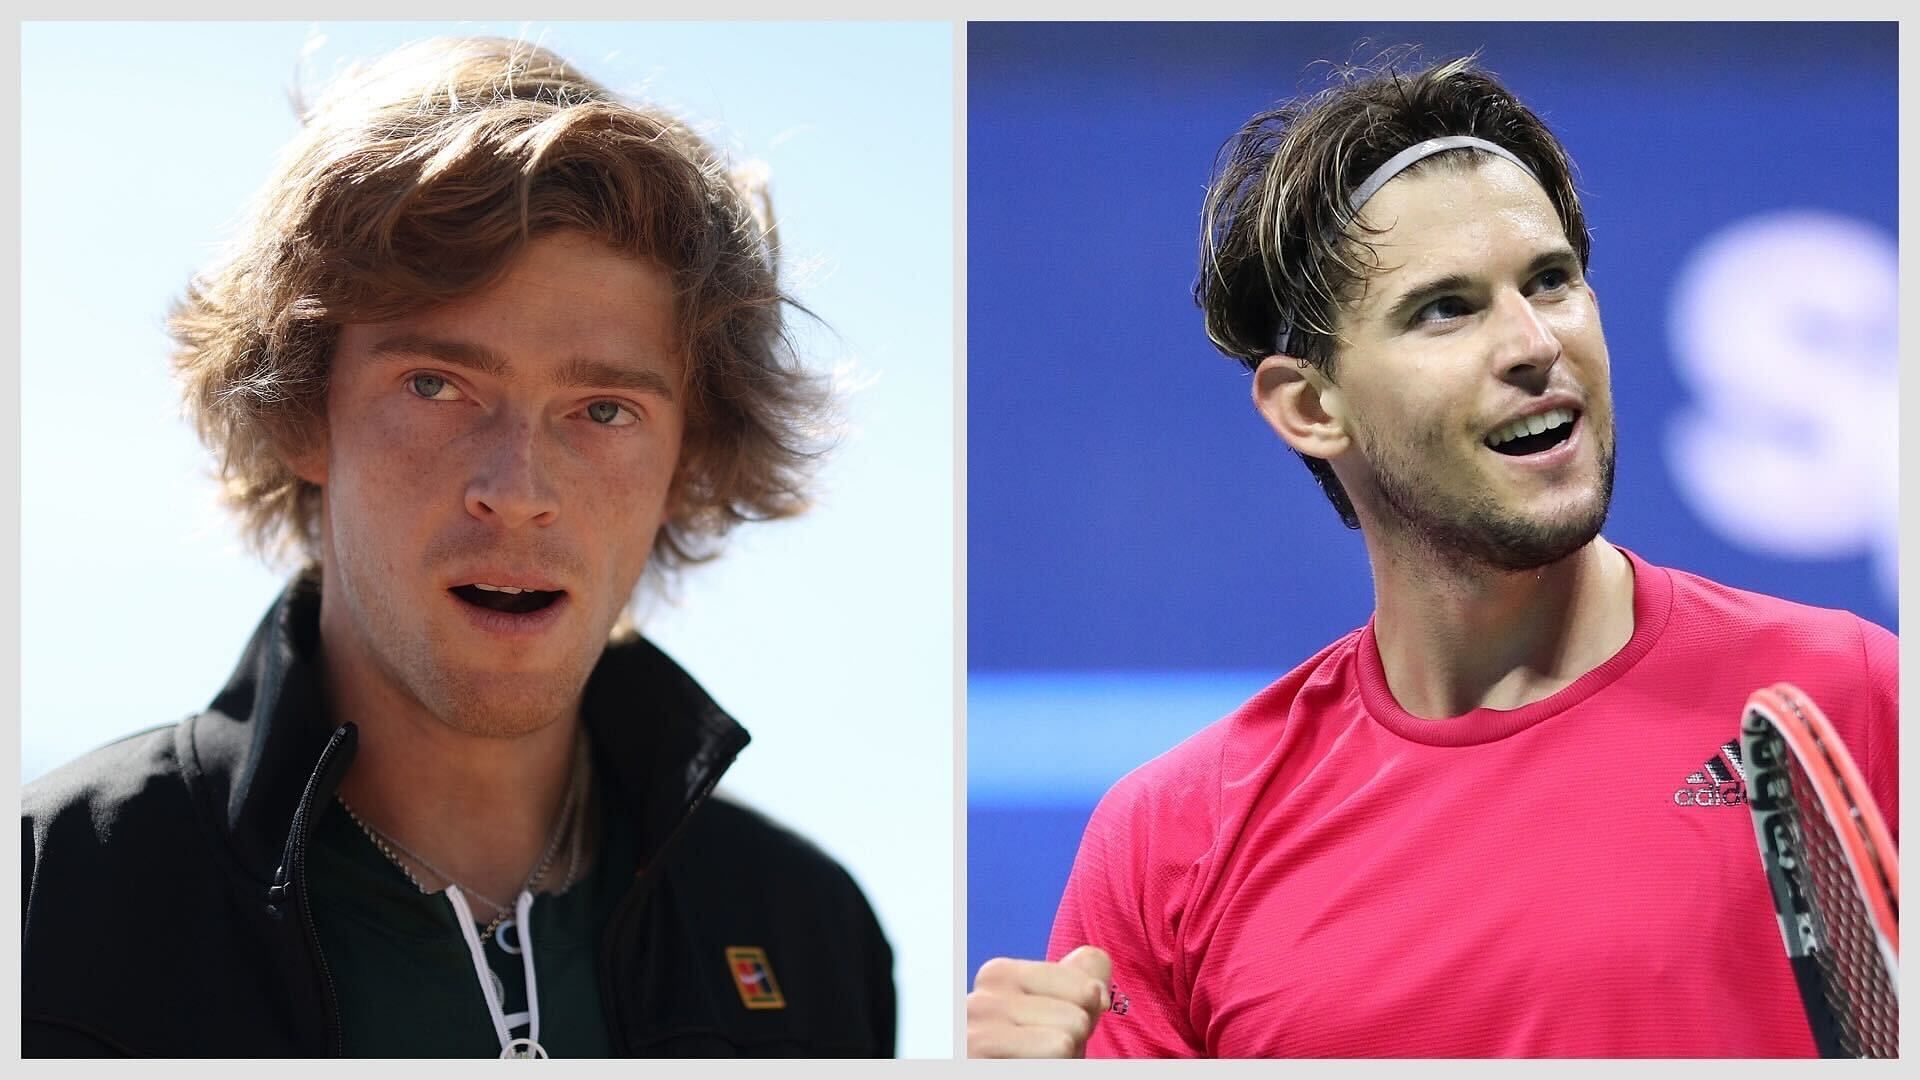 Andrey Rublev (L) and Dominic Thiem (R)